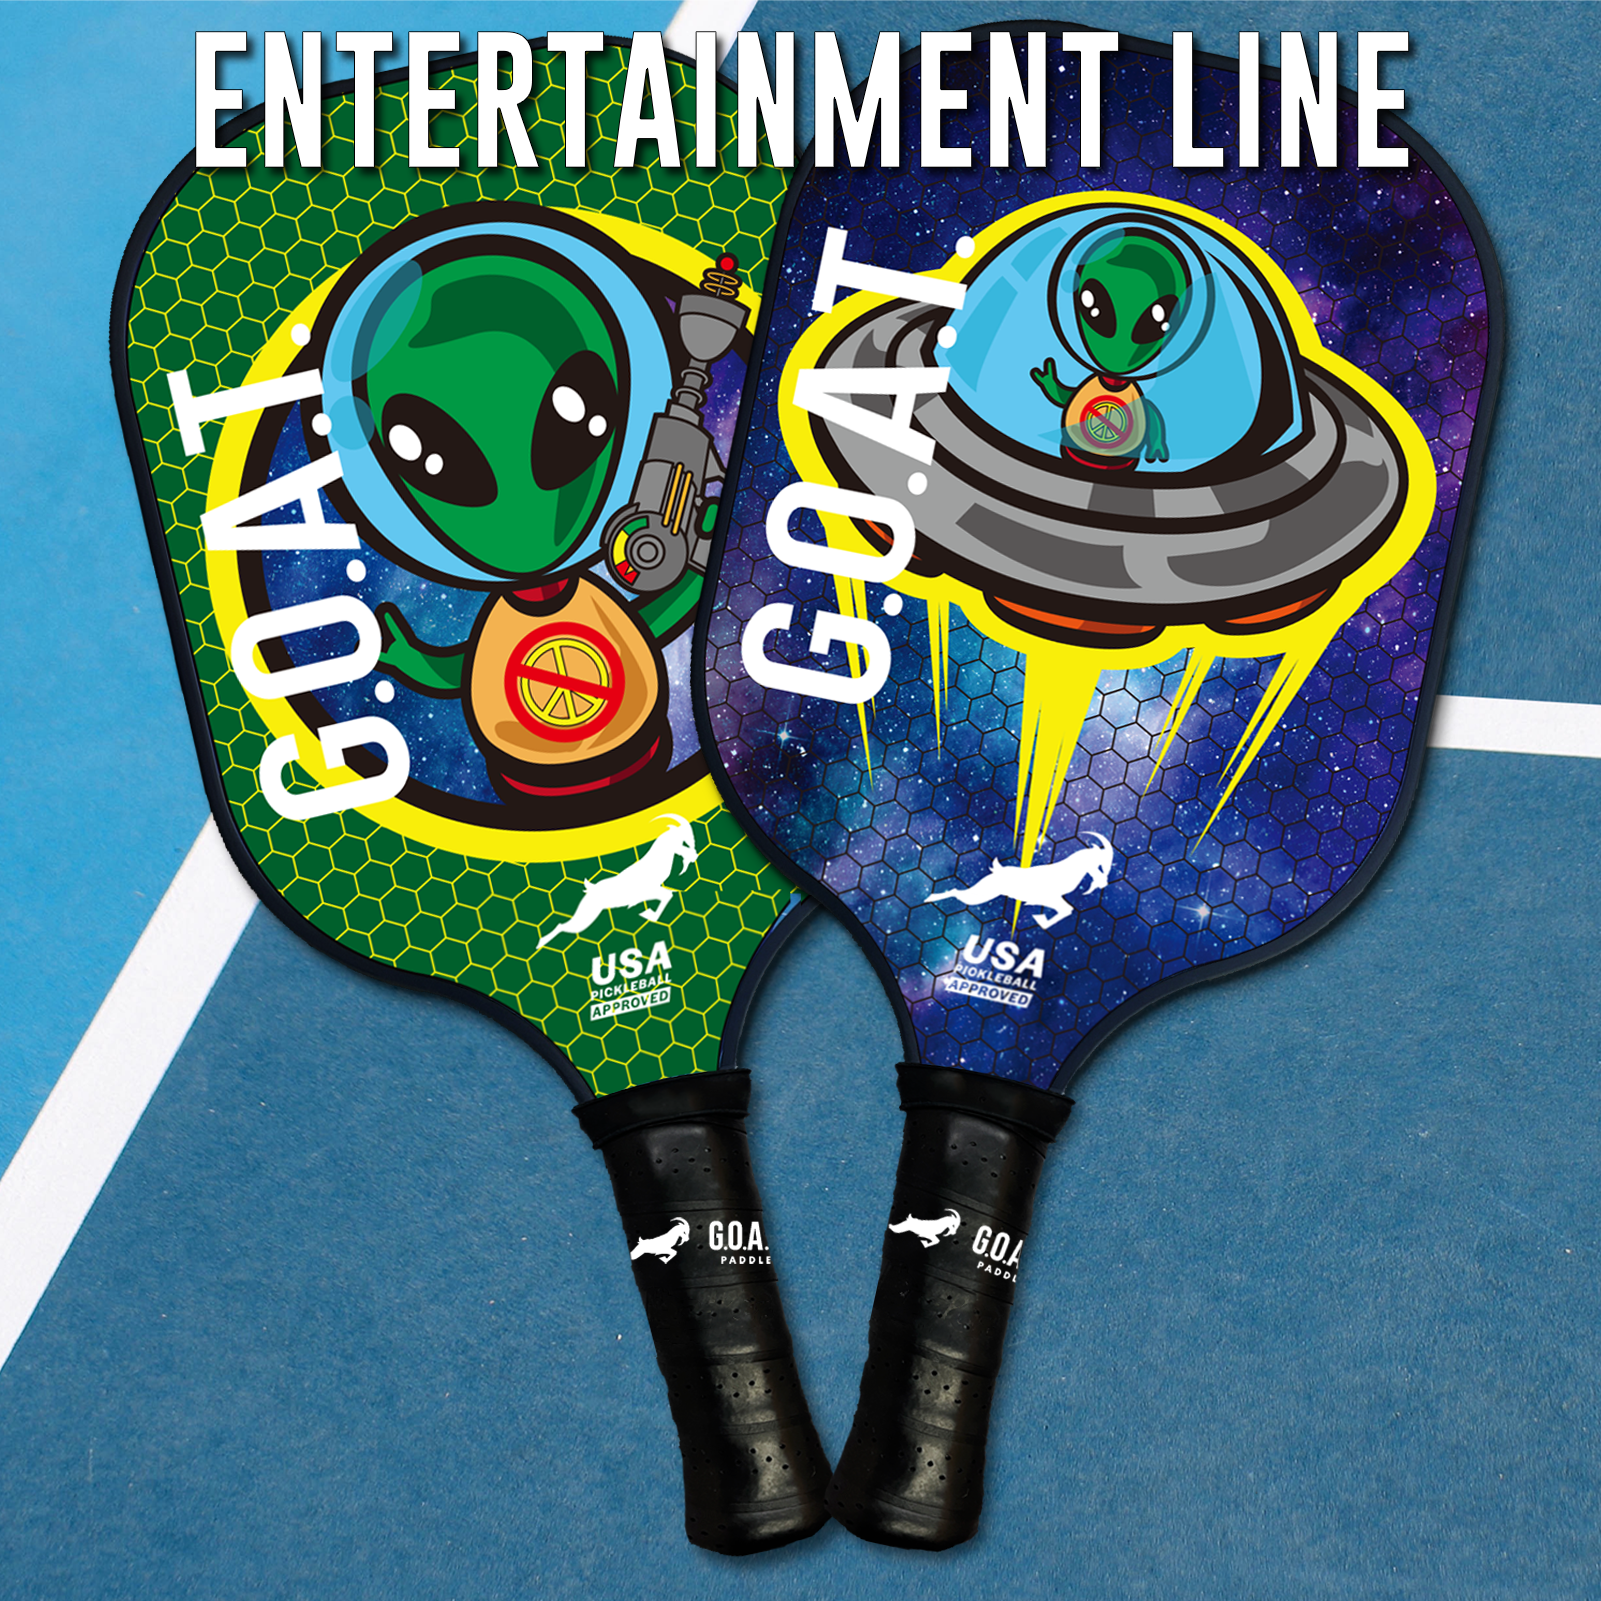 GOAT entertainment pickleball paddles featuring aliens.  Green Alien paddle featuring single alient with laser, GOAT logo and name on face.  Blue Alien paddle featuring alien flying in spaceship with GOAT logo and name on face